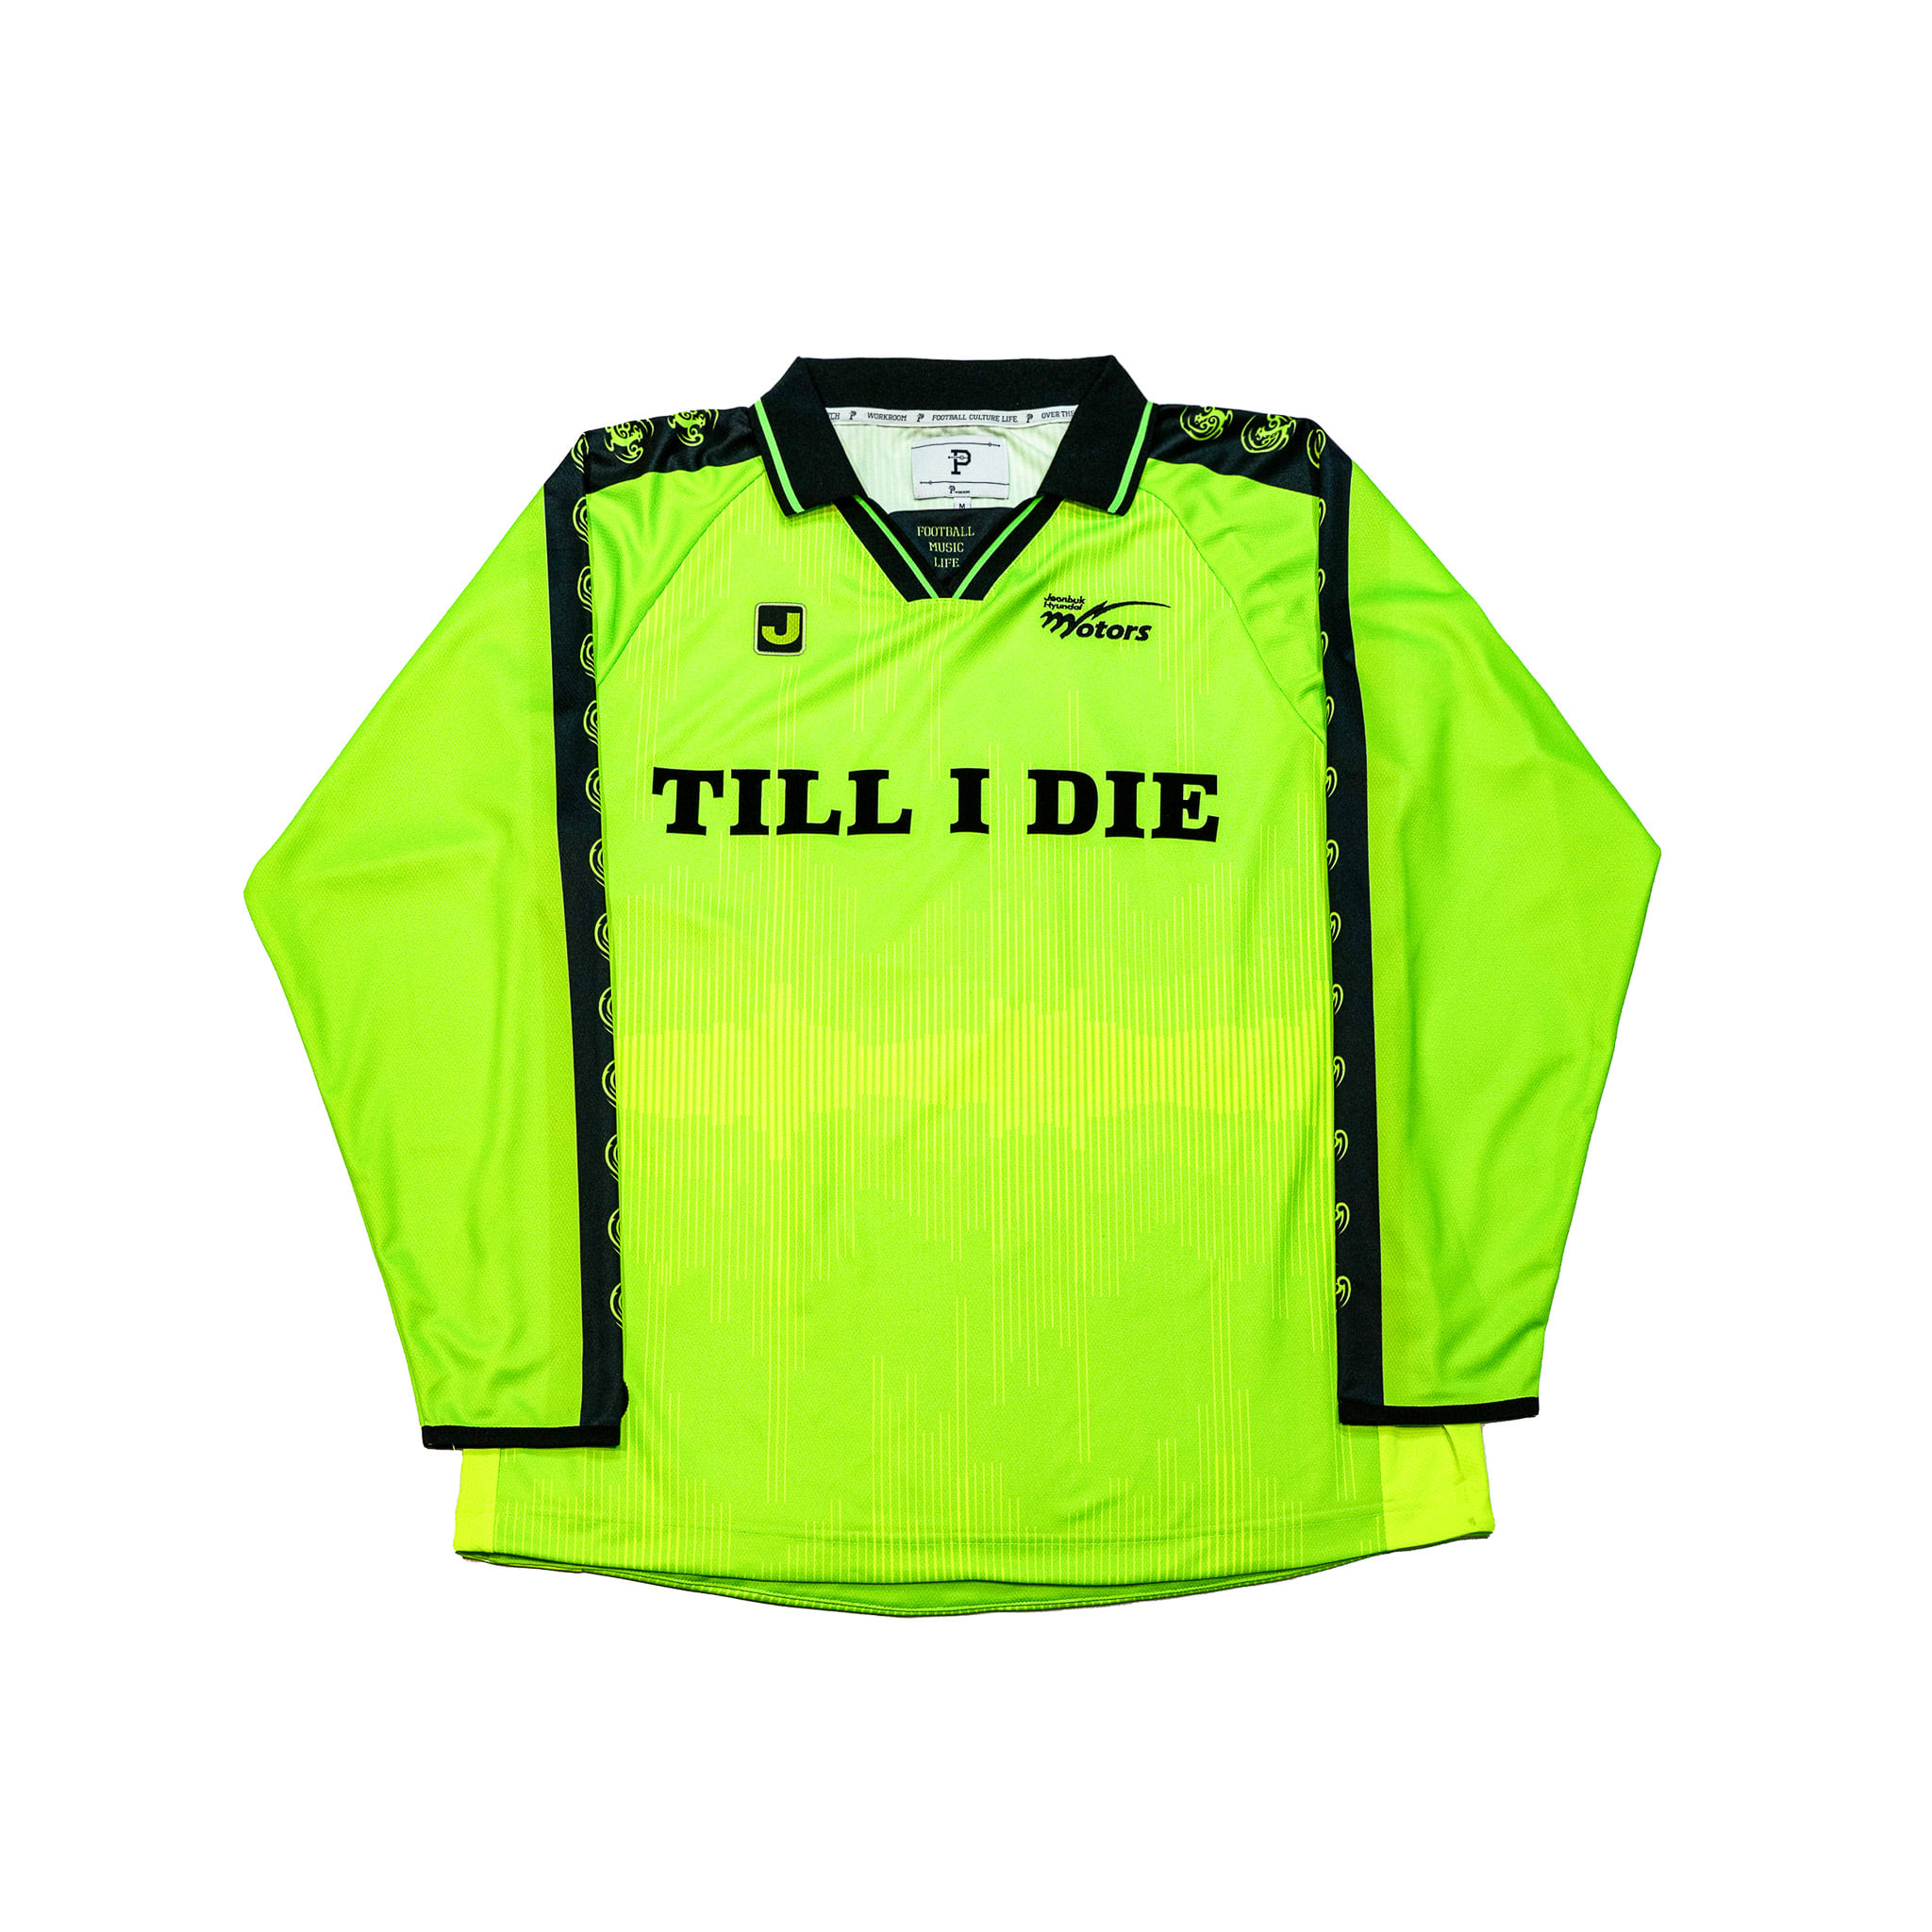 P X SONY for JBFC JERSEY - &#039;TILL I DIE&#039; Edition